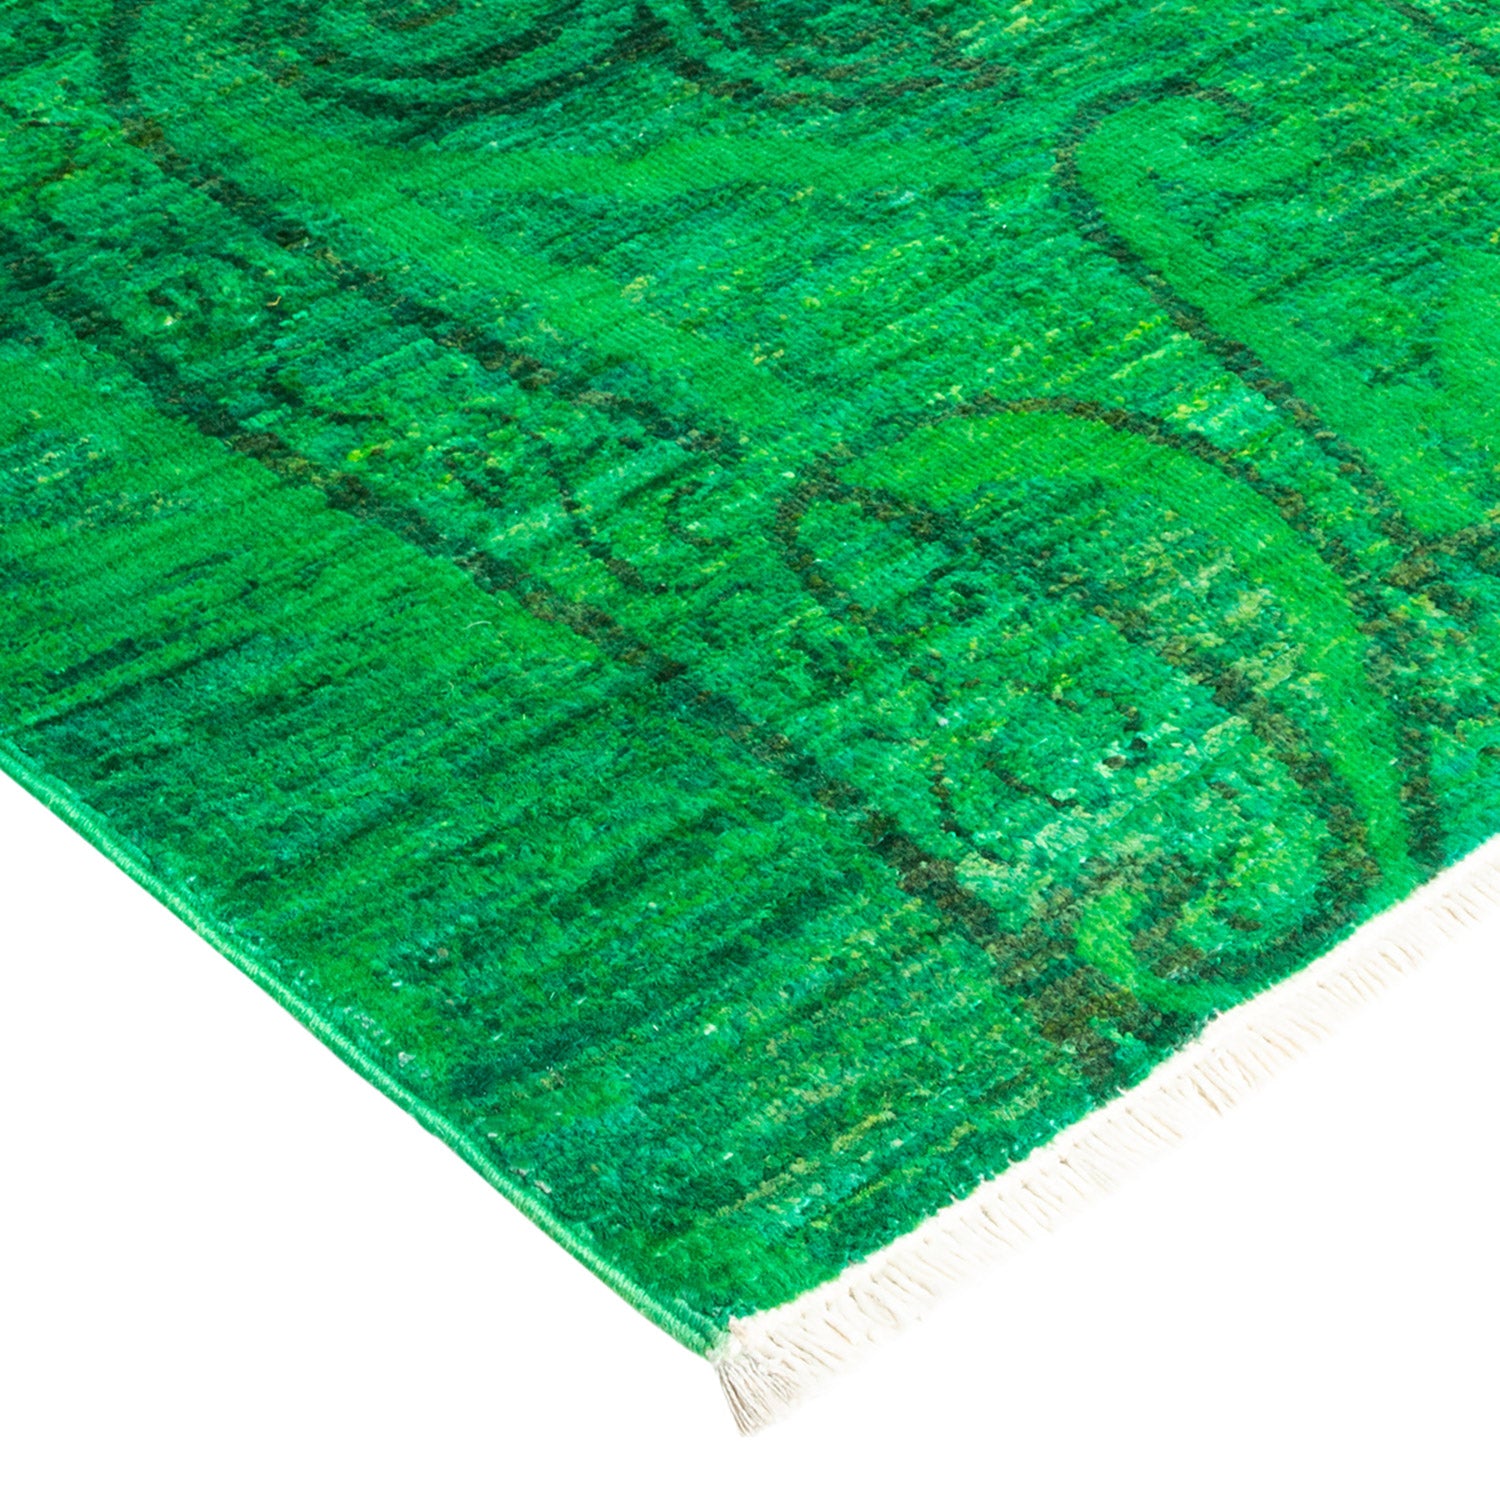 Vibrant green rug with wavy pattern and fringed edge.